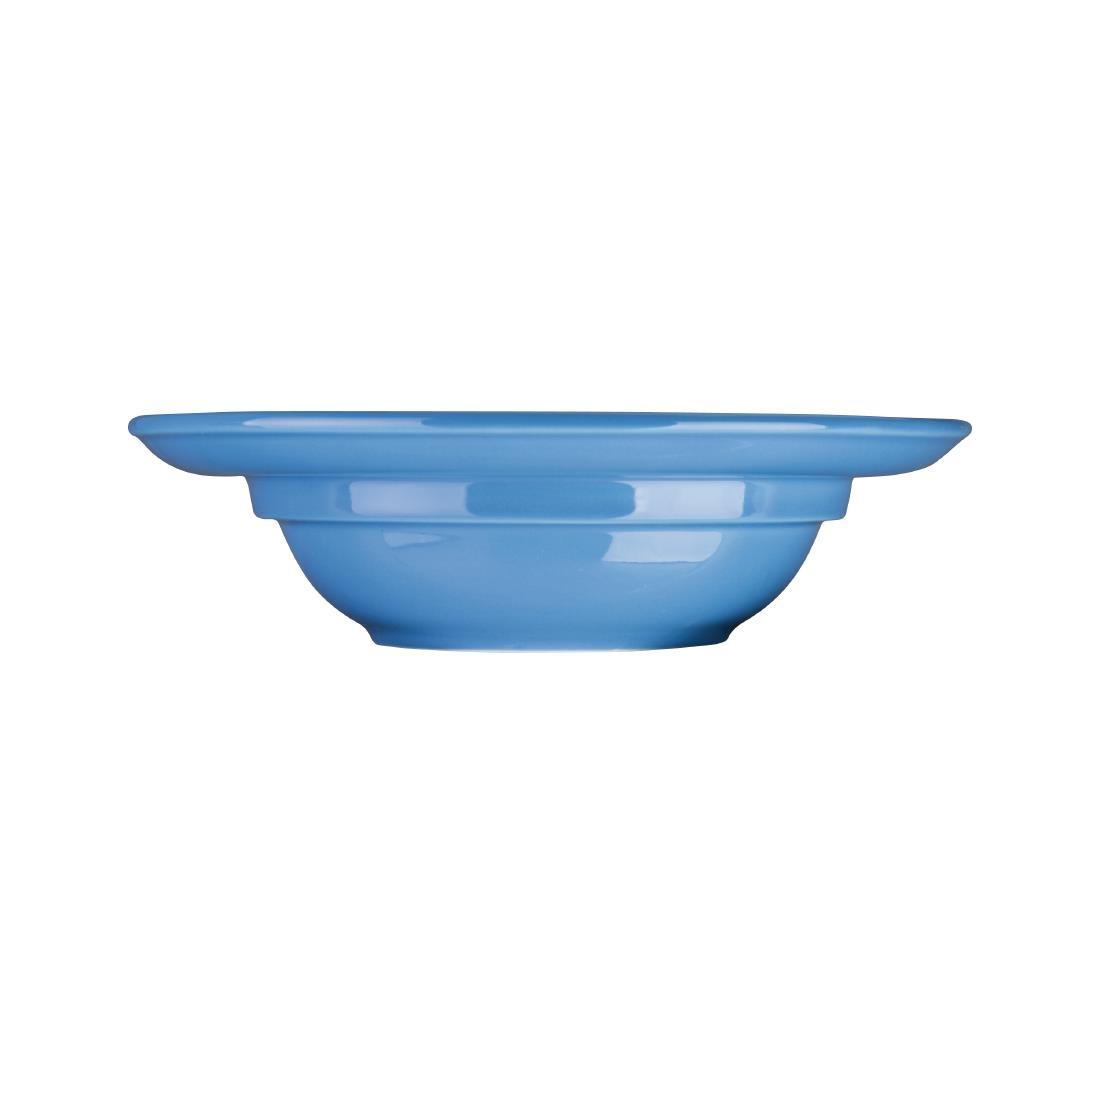 Olympia Kristallon HeritageRaised Rim Bowls Blue 205mm (Pack of 4) - DW702  - 4